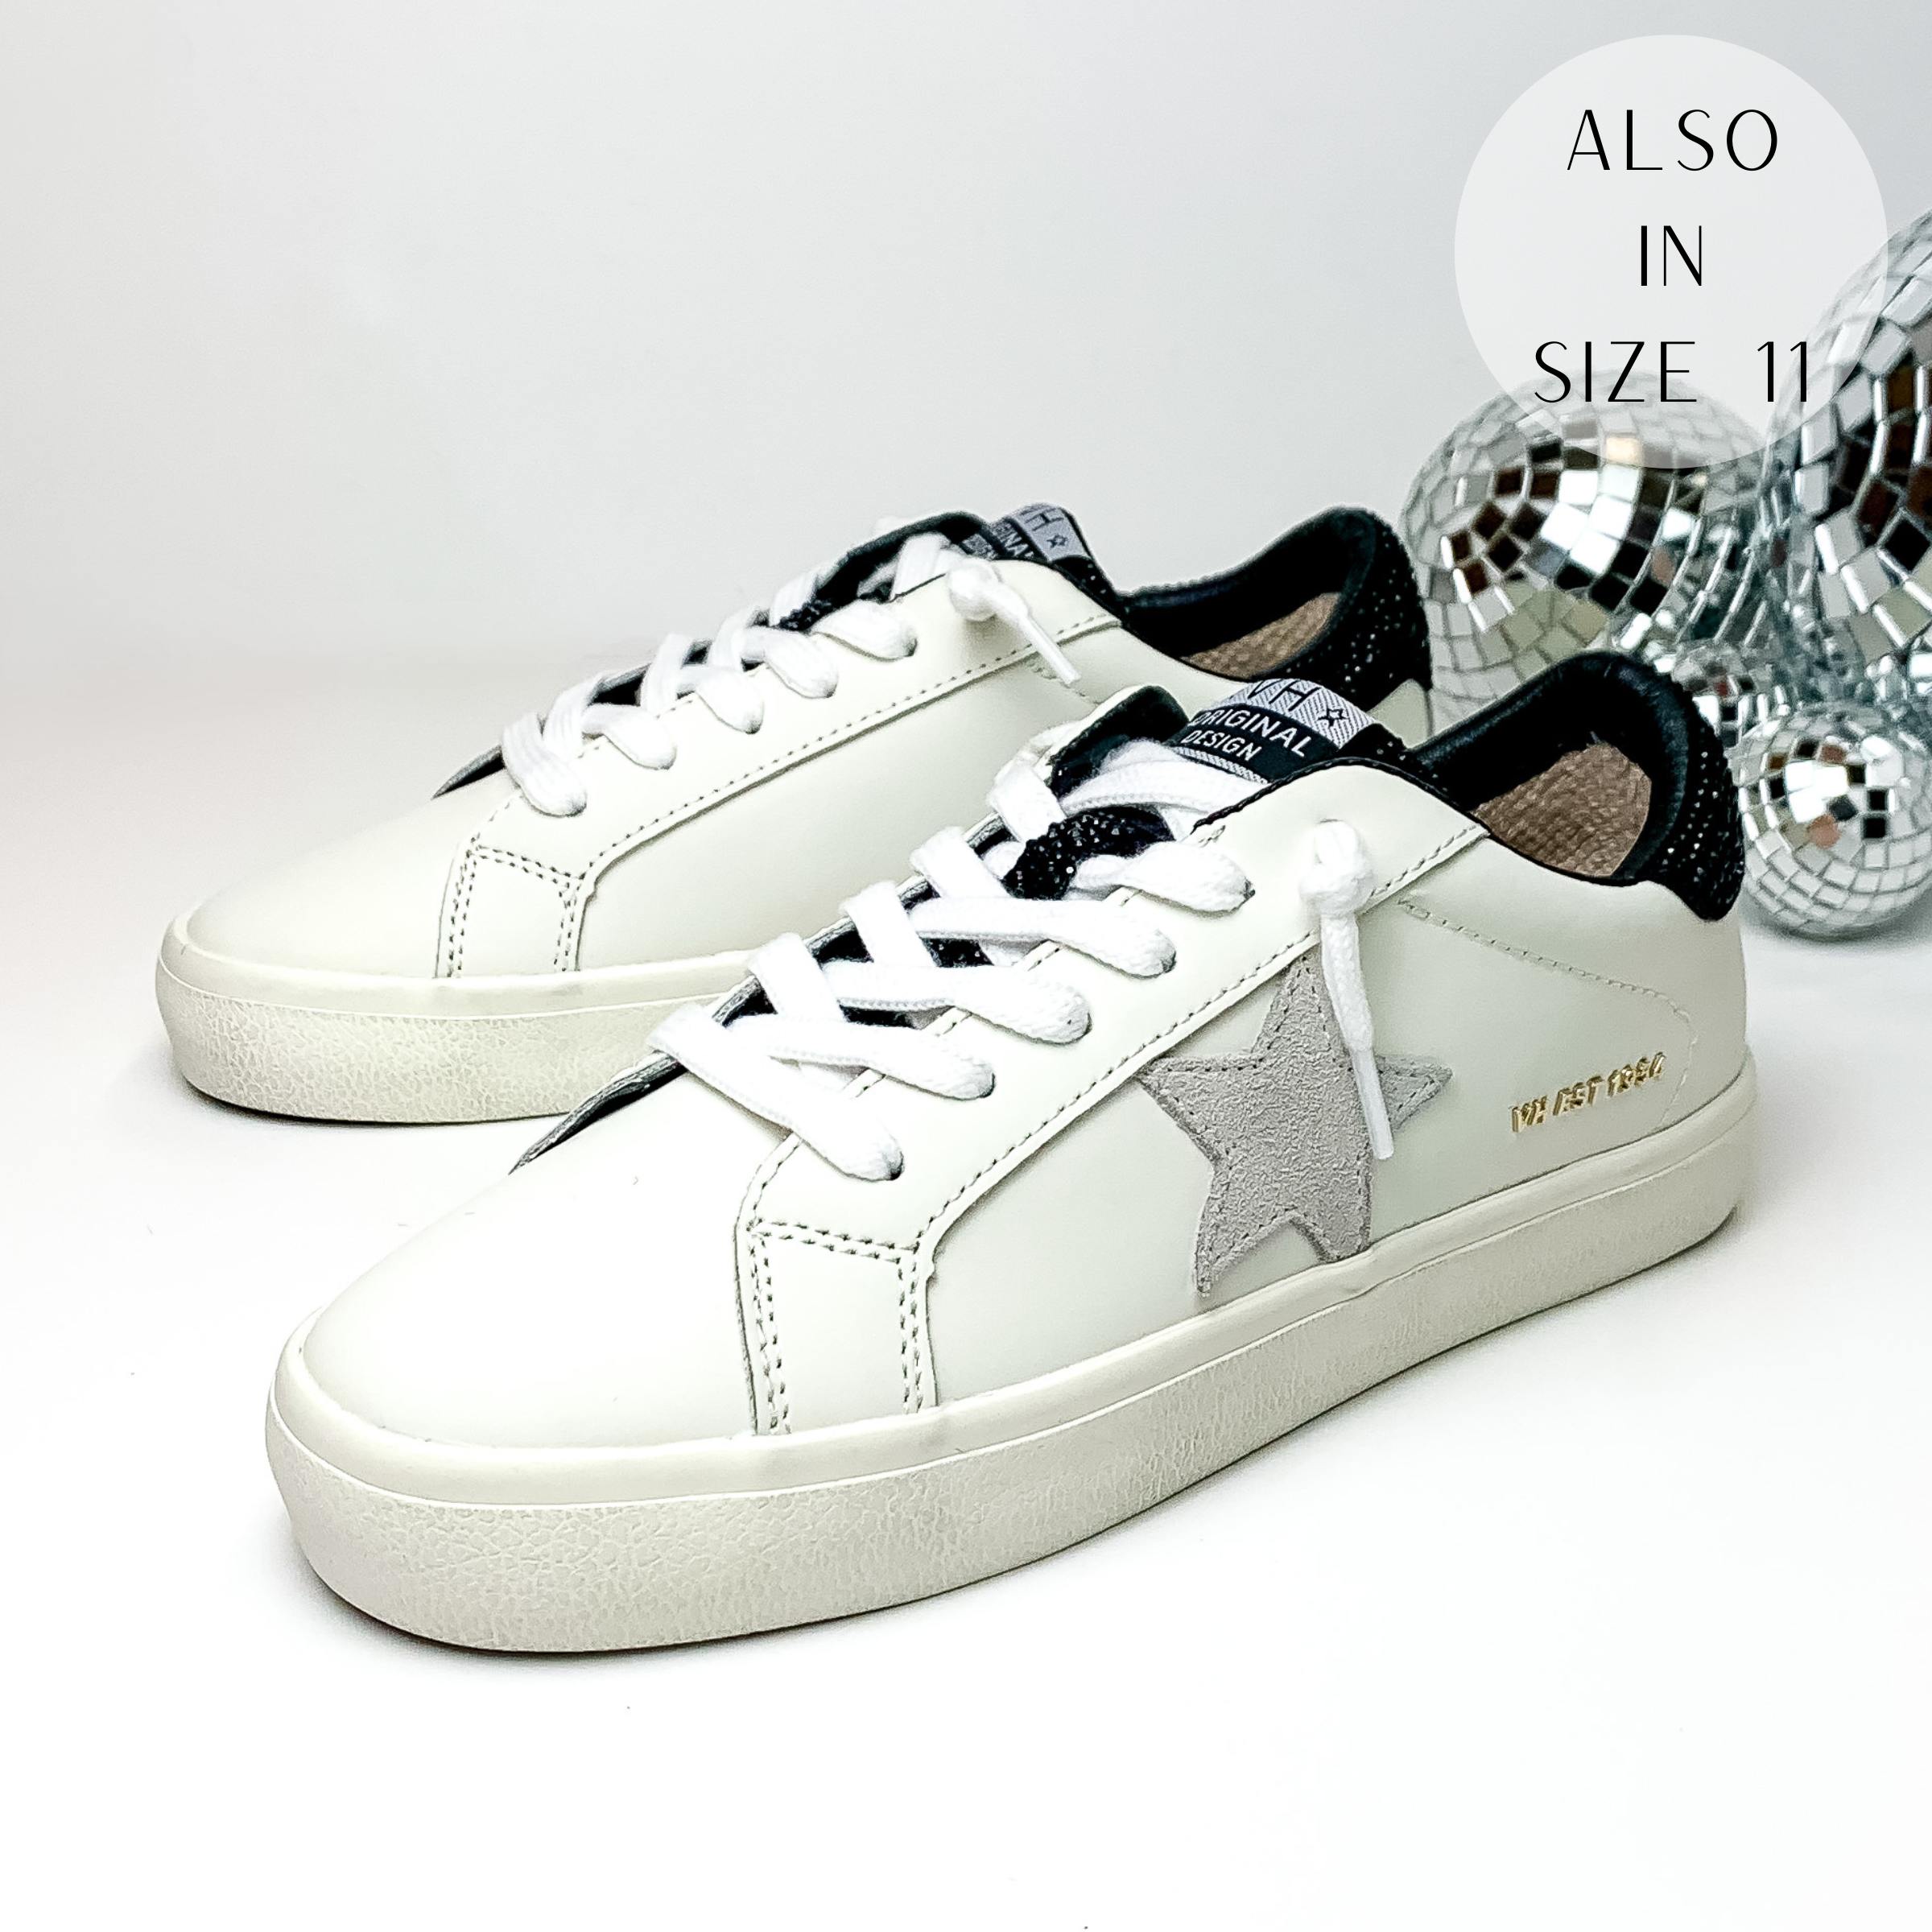 Vintage Havana | Raz Sneakers in White with Black Crystals - Giddy Up Glamour Boutique